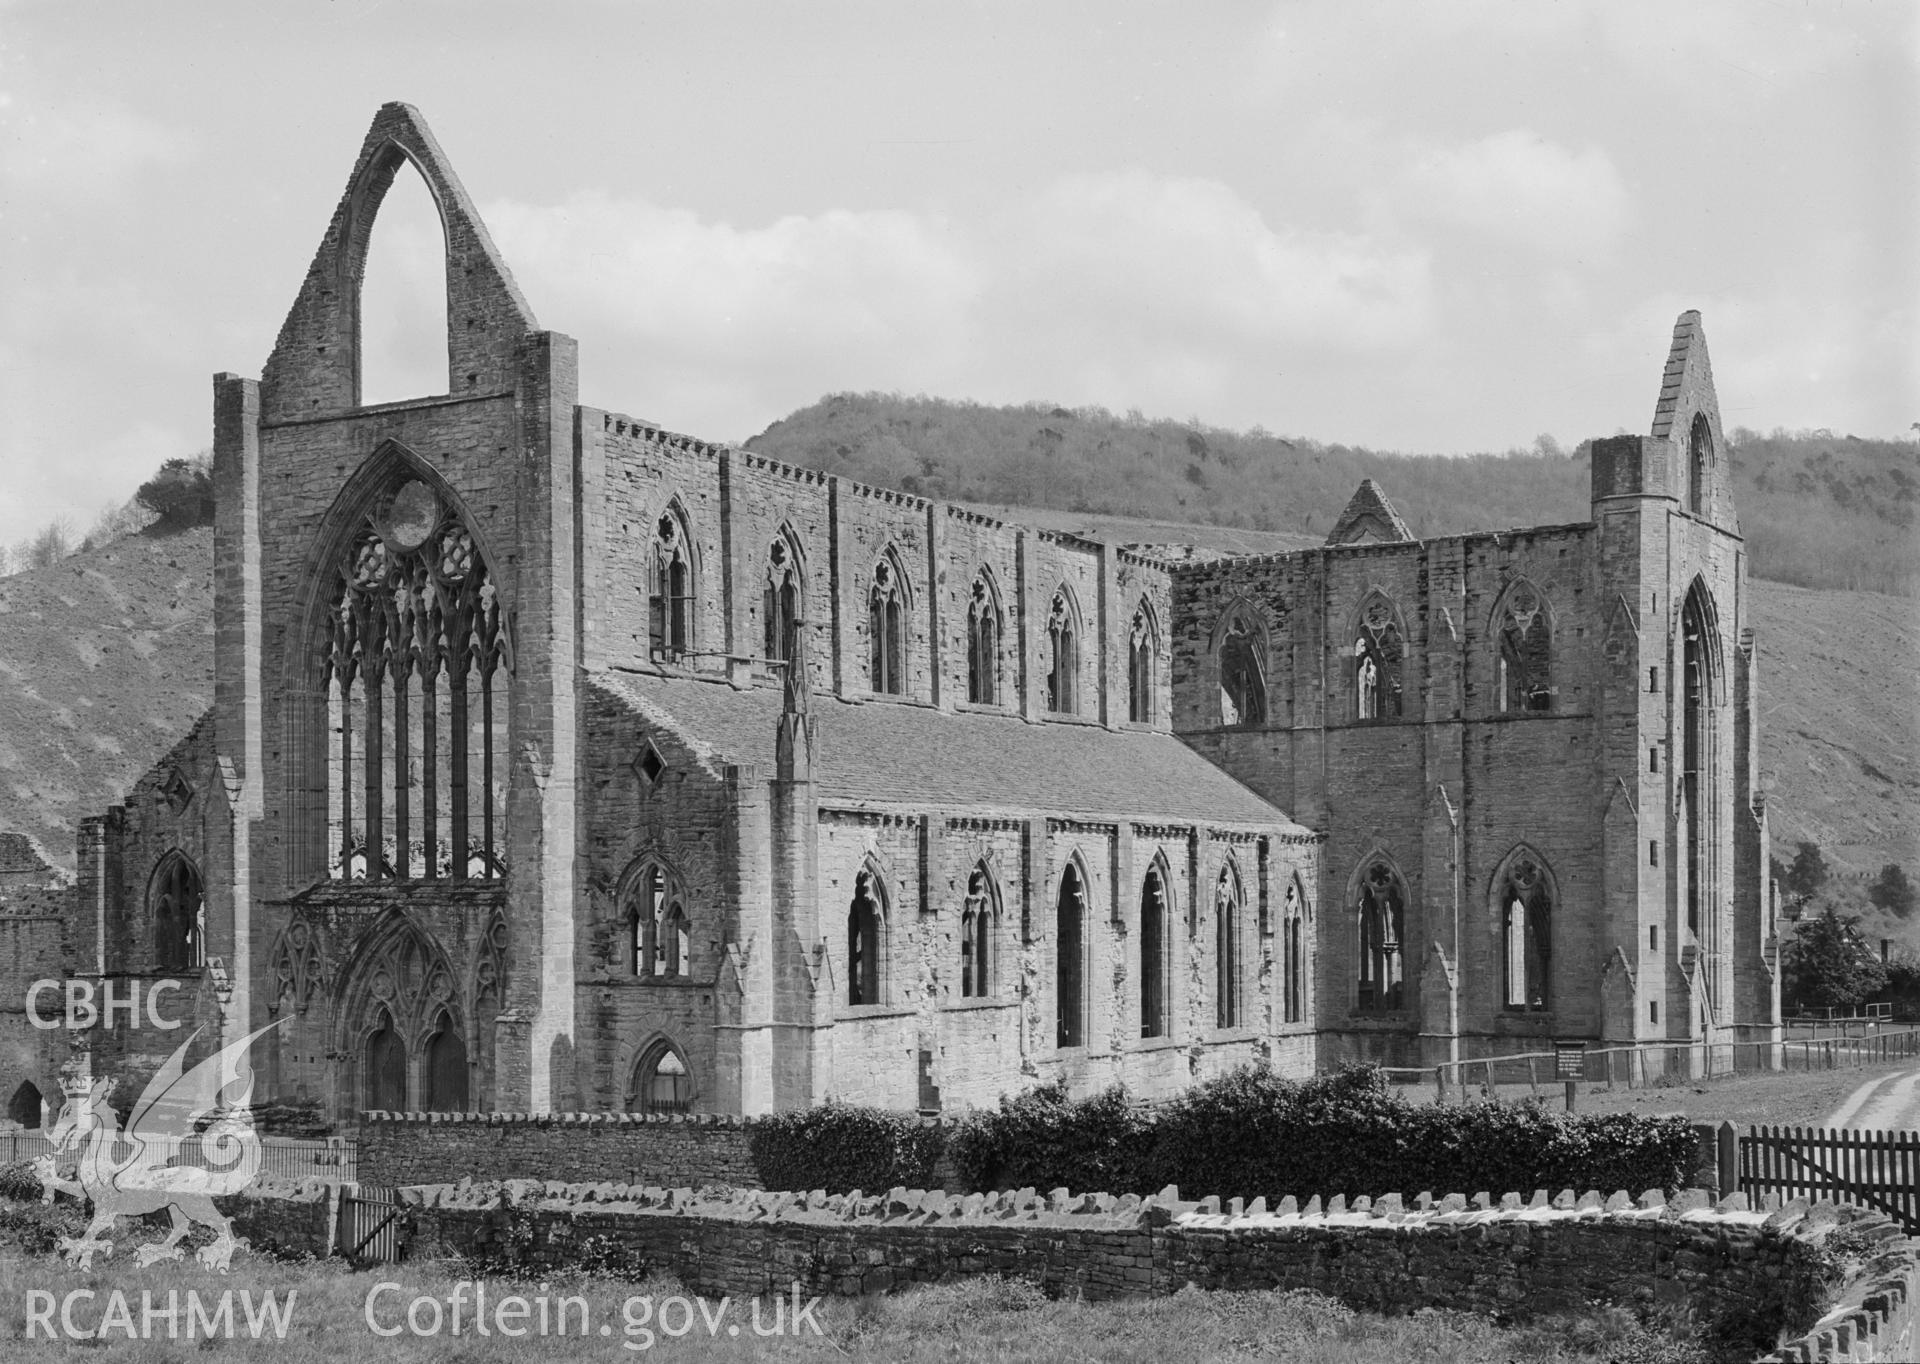 Exterior view of Tintern Abbey from the southwest, taken by Clayton.